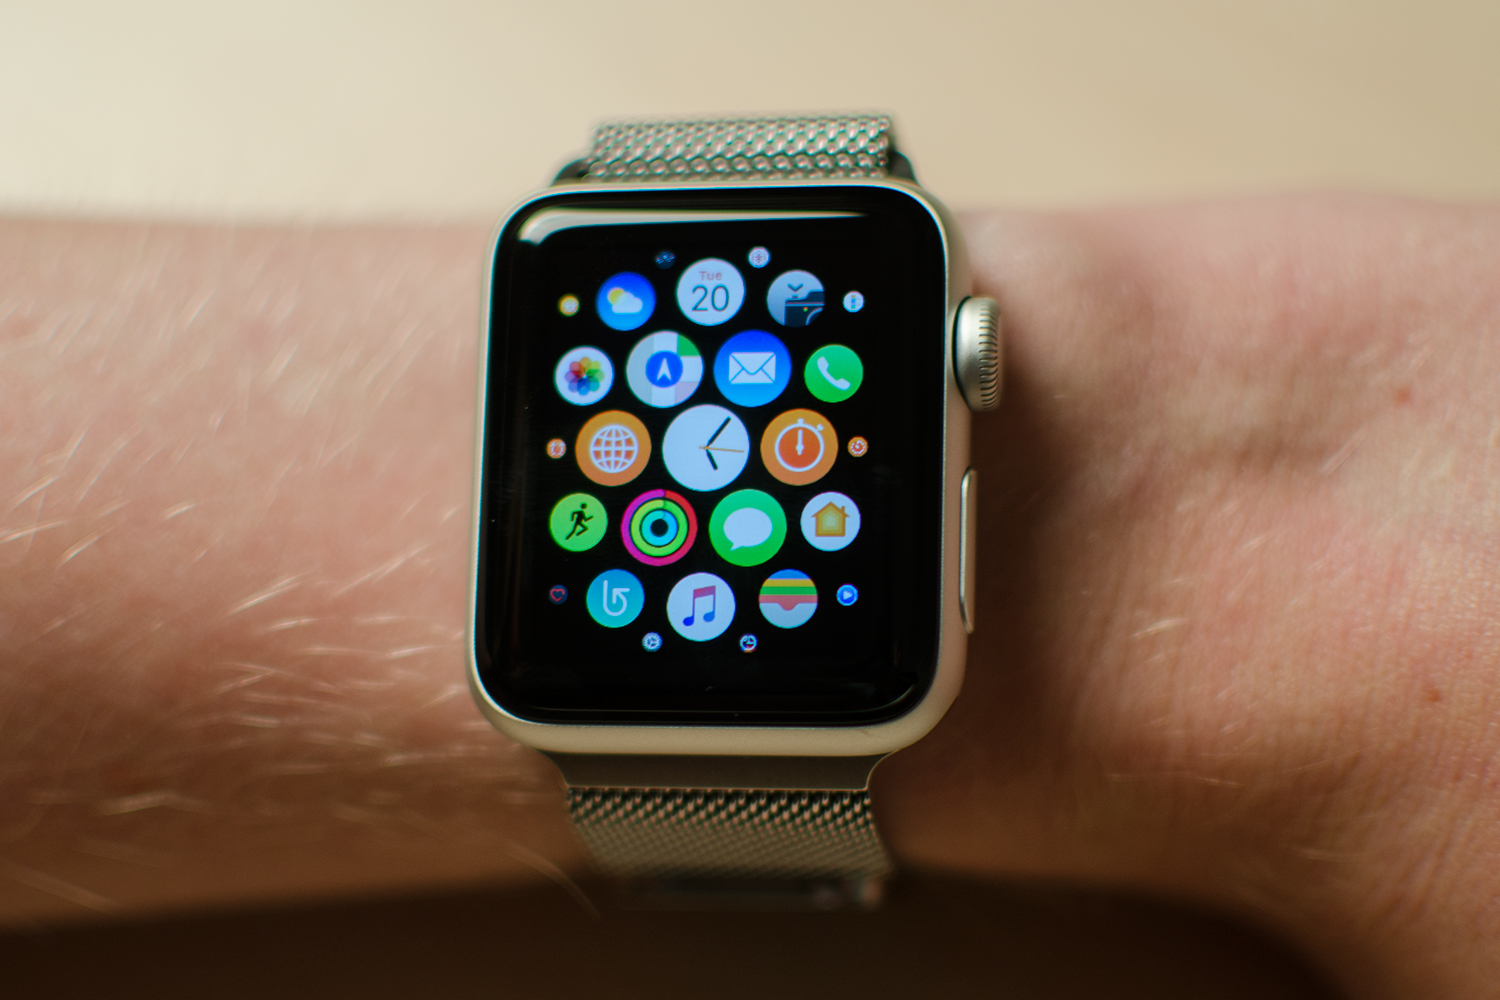 Apple Watch Series 2 Review: The Best Gets Better | Digital Trends